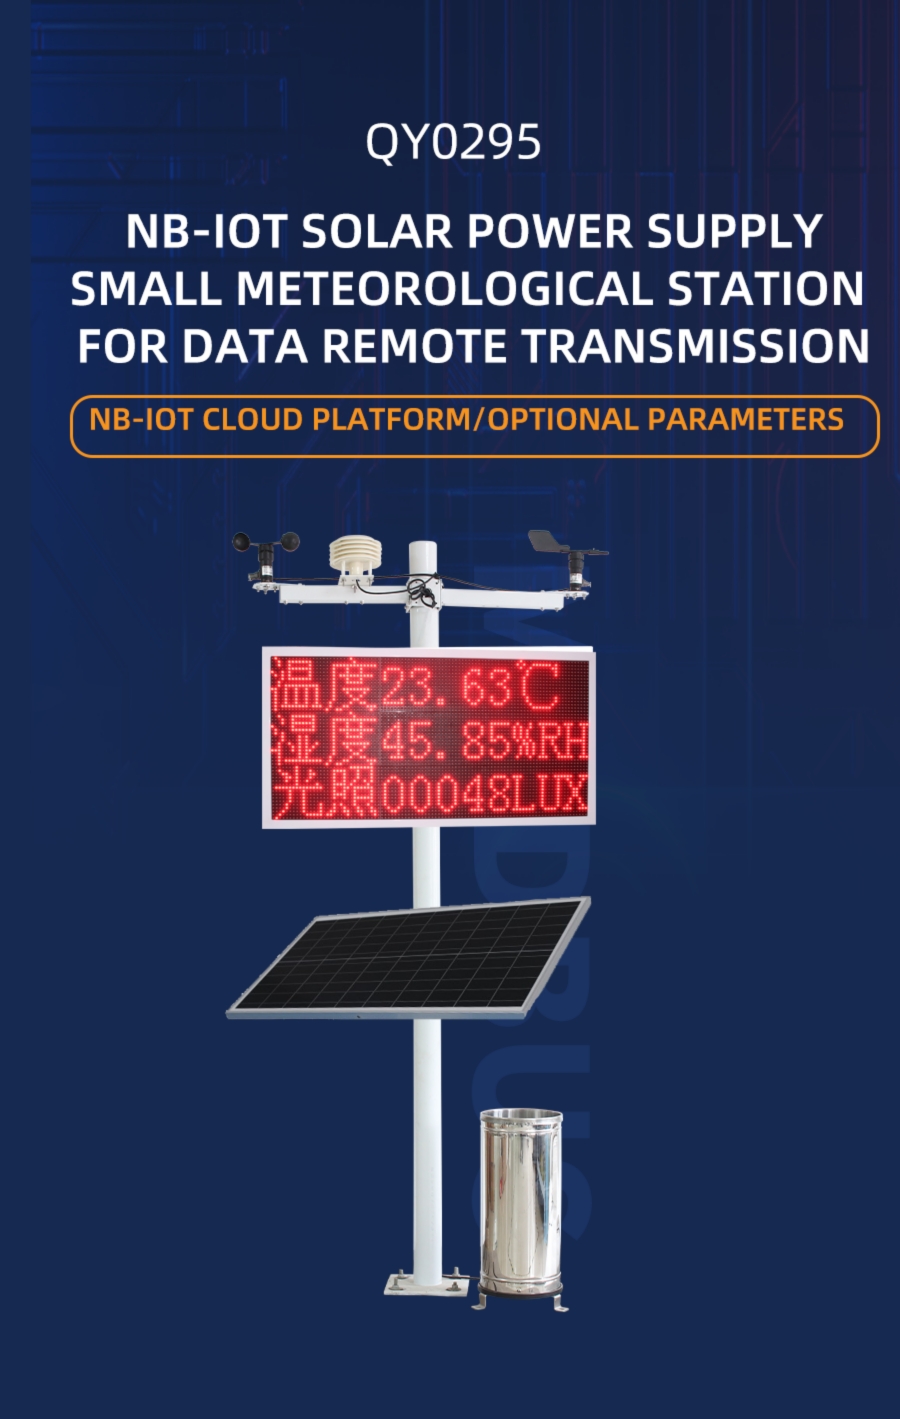 Small weather station on a solar-powered cloud platform